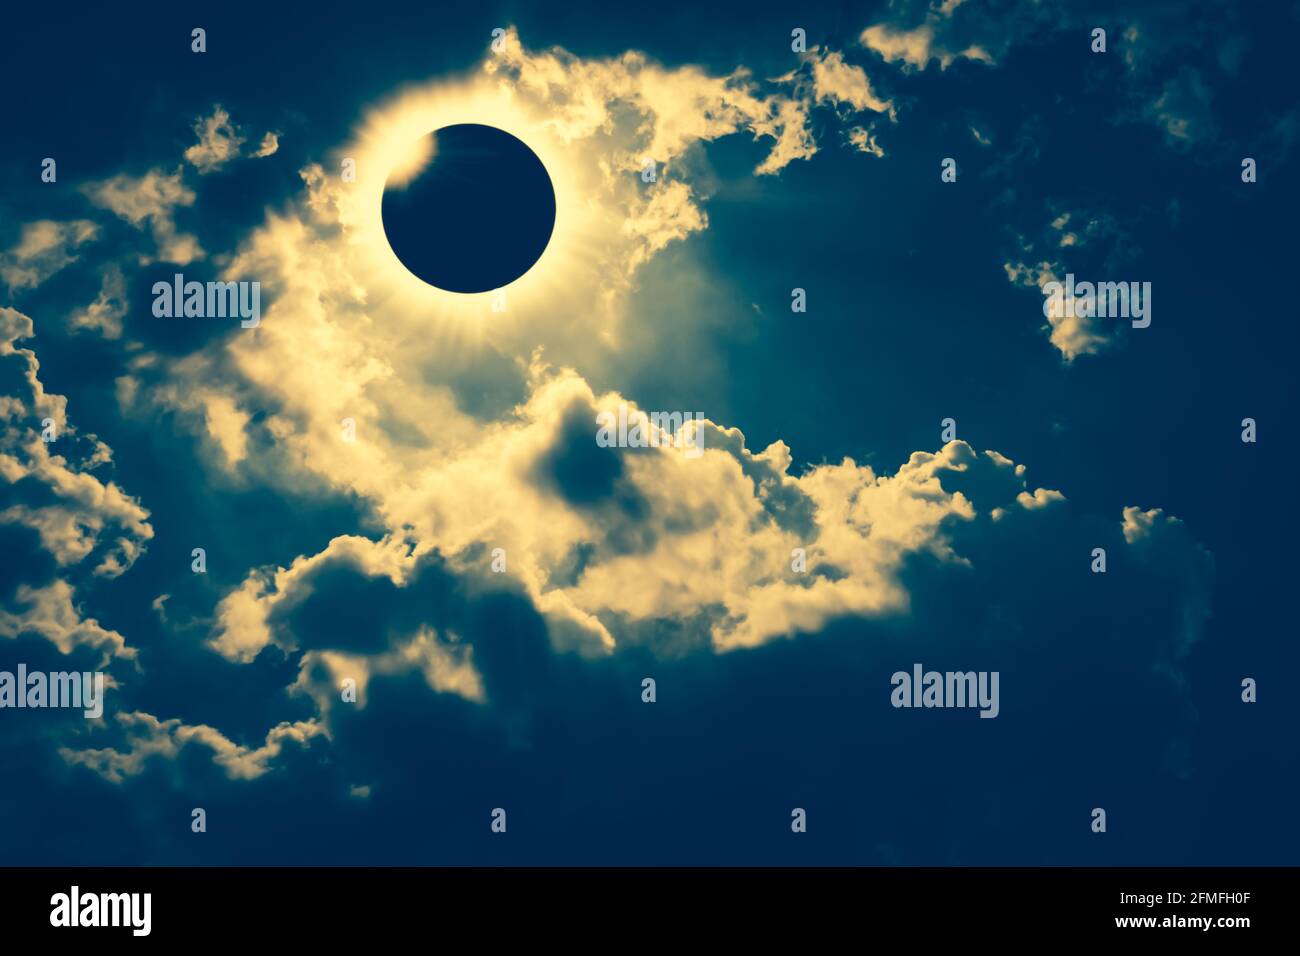 Amazing scientific natural phenomenon. Total solar eclipse with diamond ring effect glowing on sky with dark clouds. Abstract fantastic background of Stock Photo